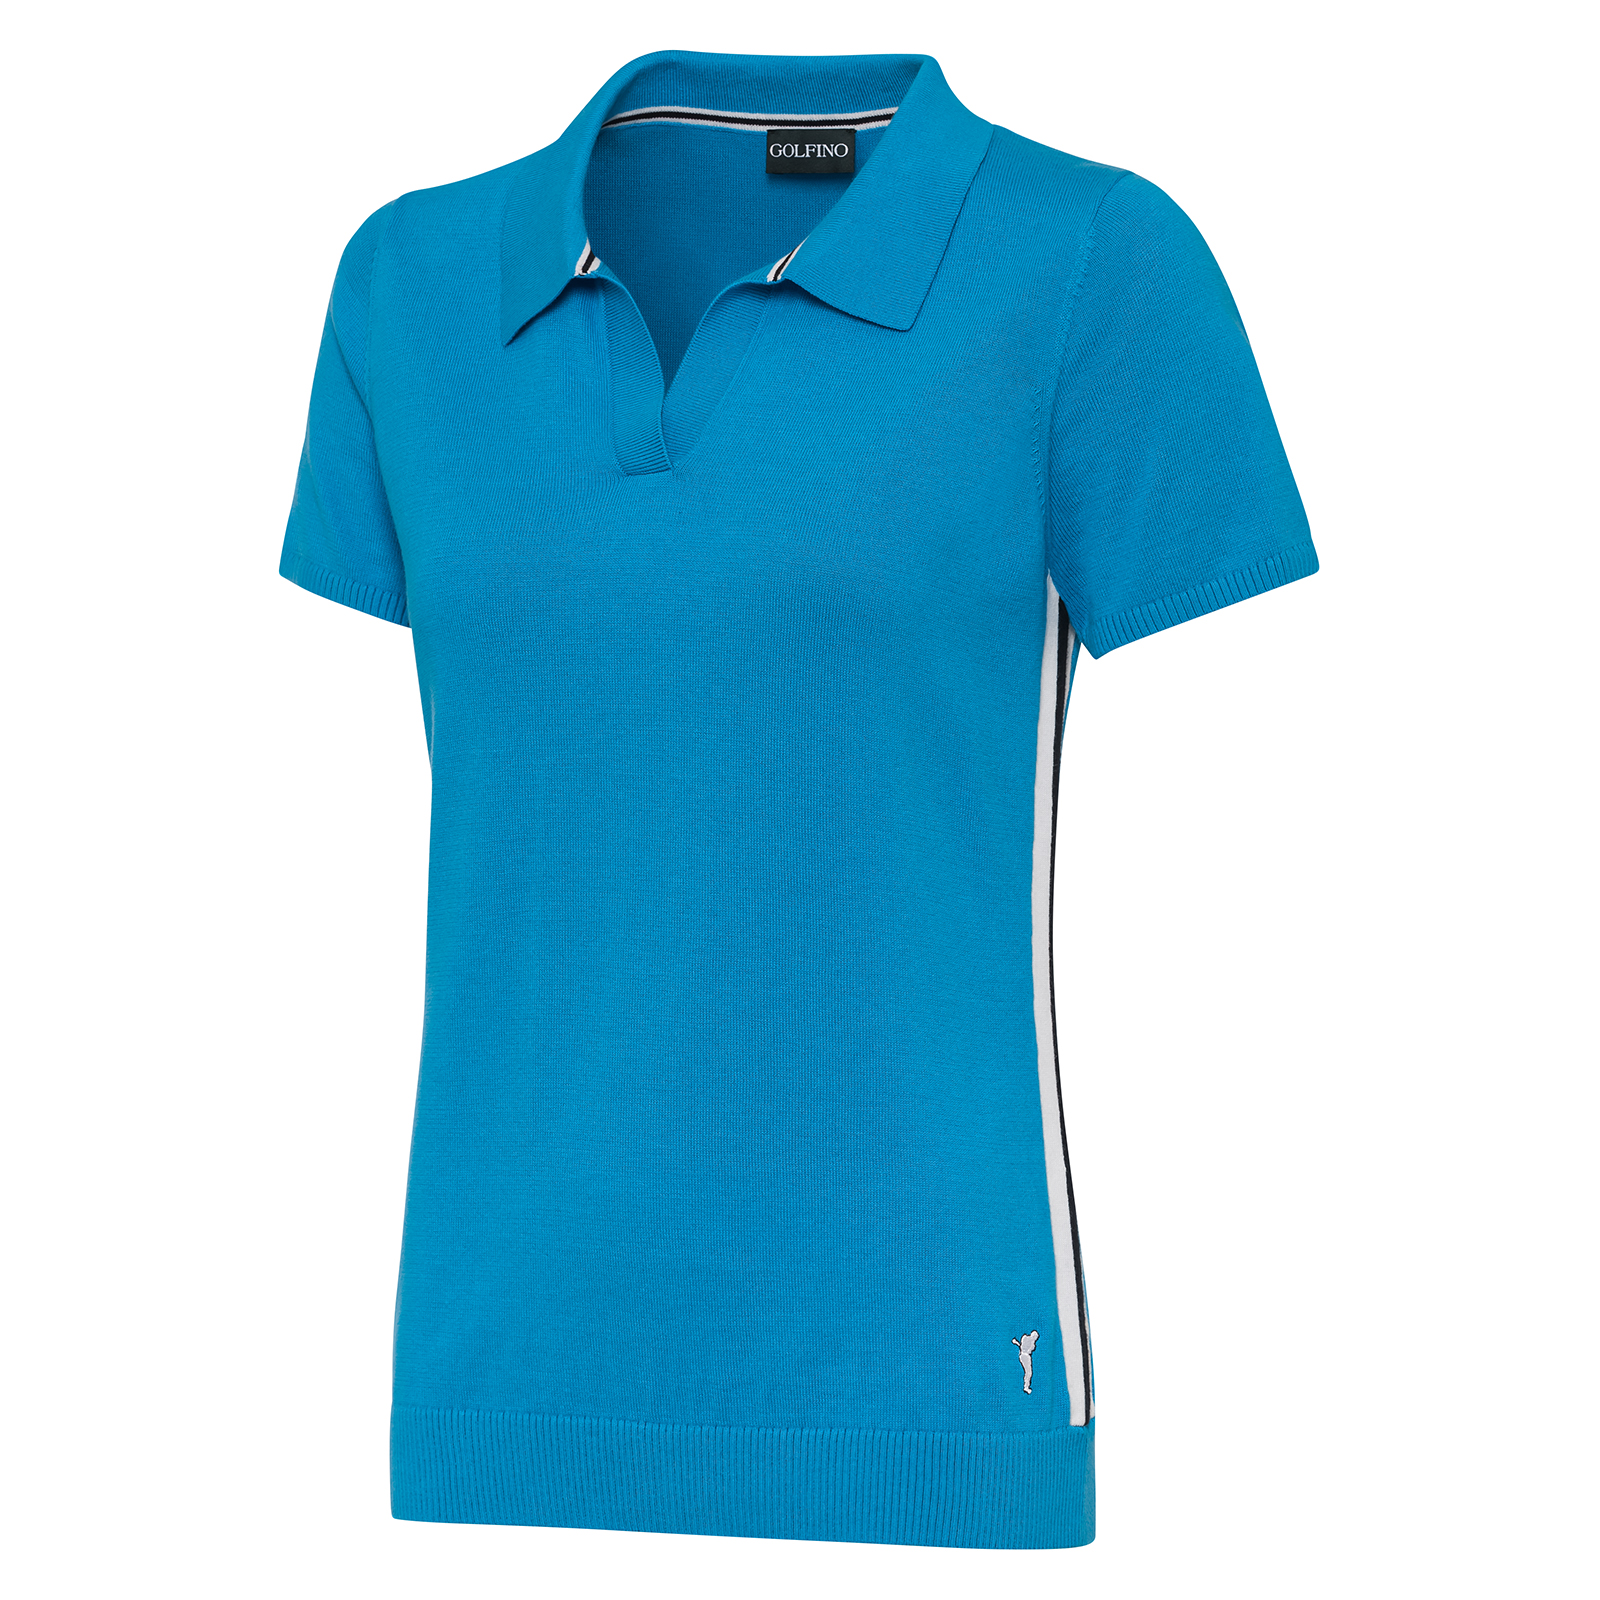 Ladies' golf polo shirt made from particularly soft Pima cotton